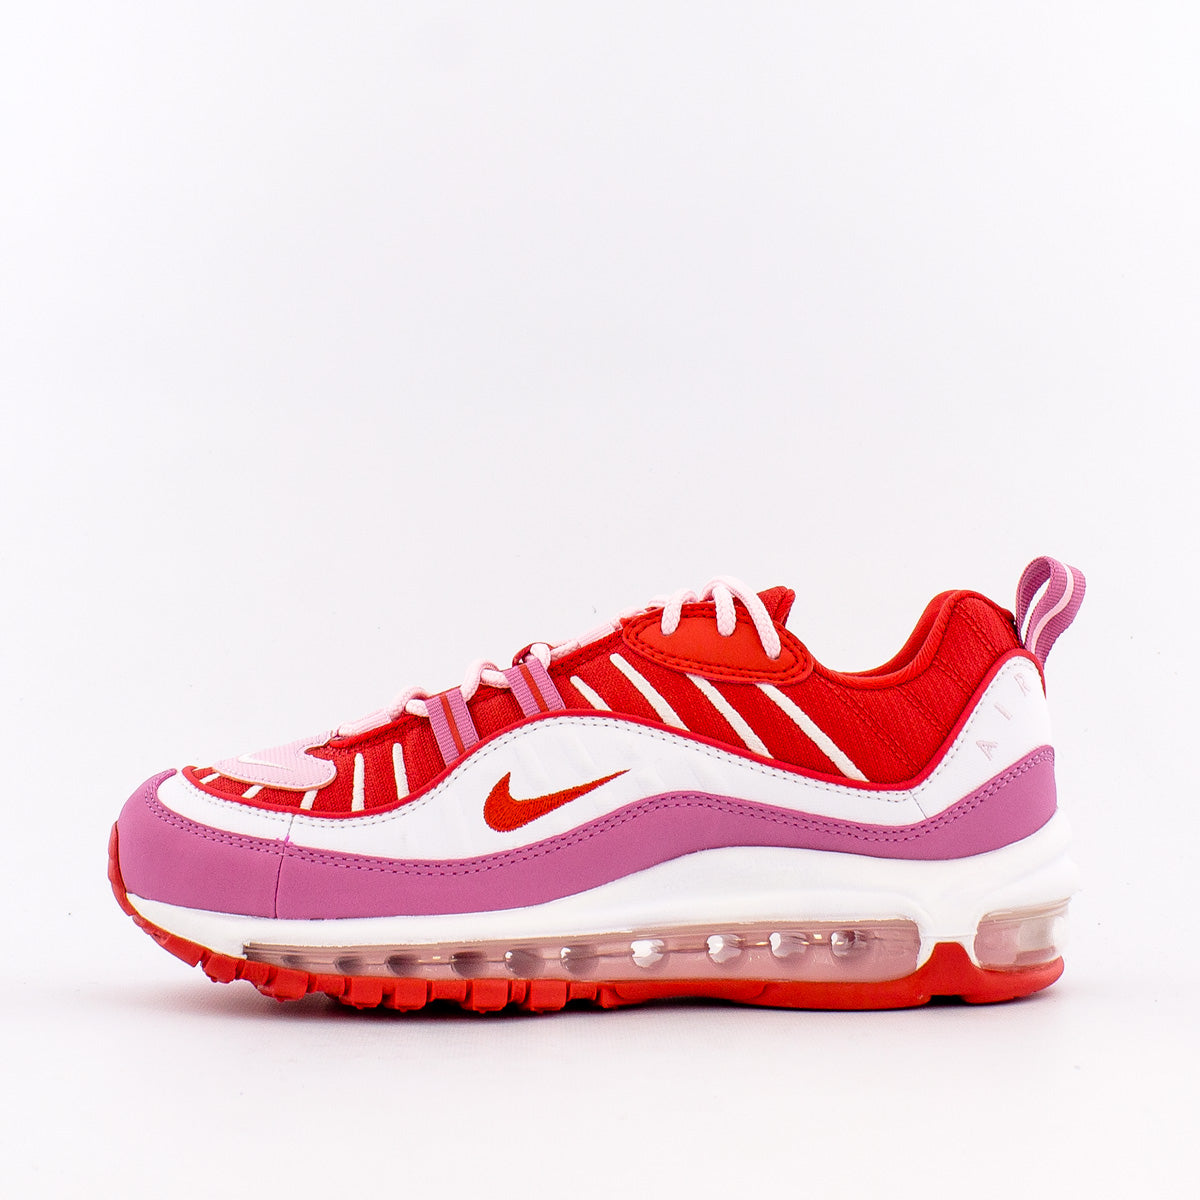 Nike Air Max 98 (W) – “Valentines Day 